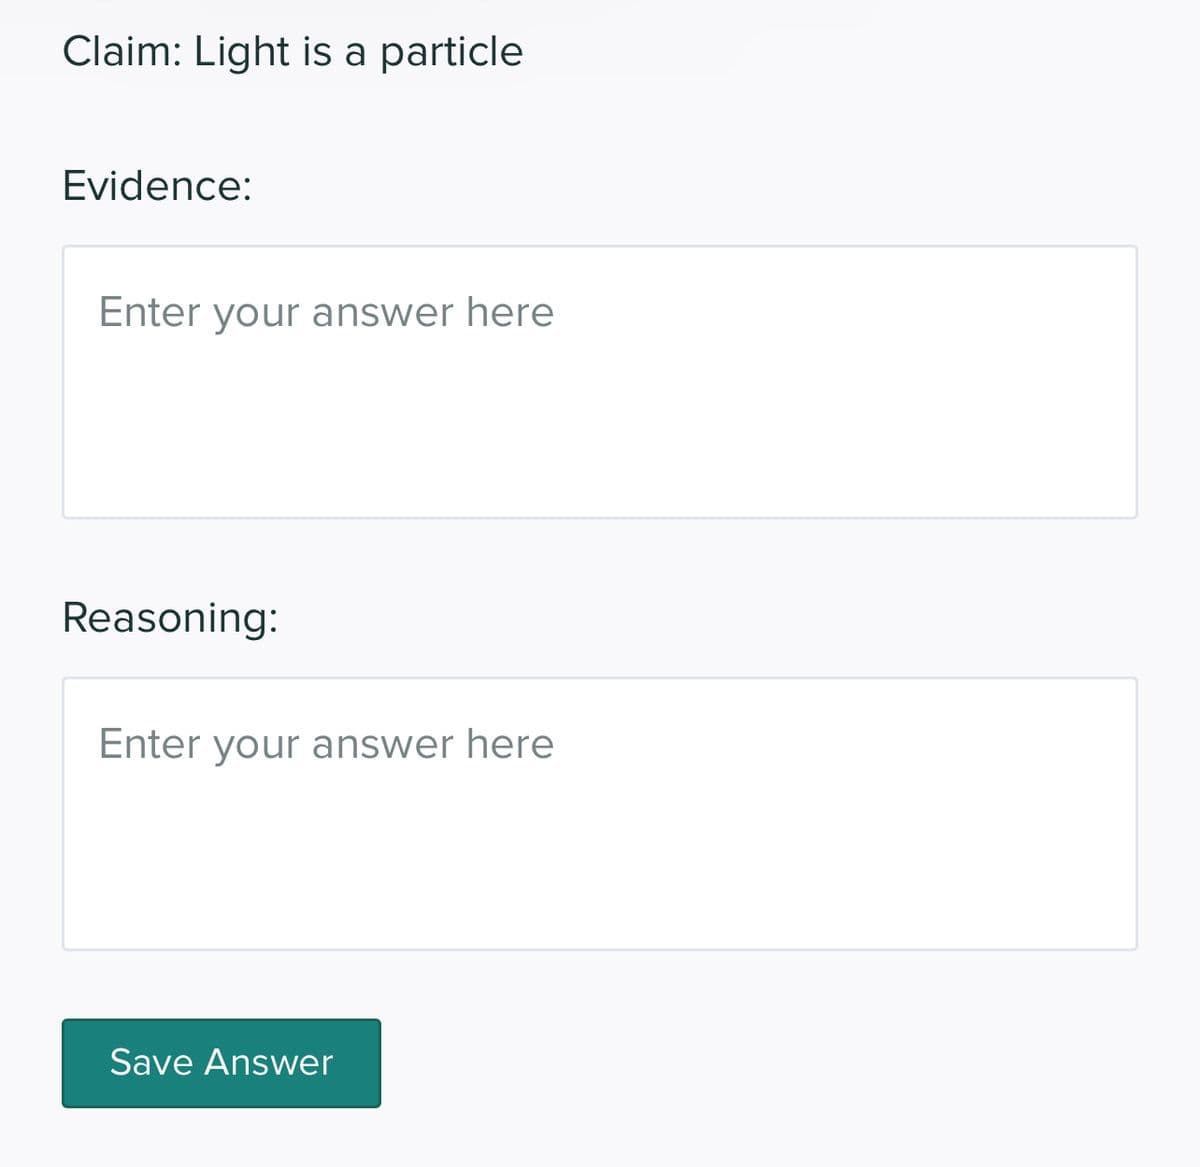 Claim: Light is a particle
Evidence:
Enter your answer here
Reasoning:
Enter your answer here
Save Answer